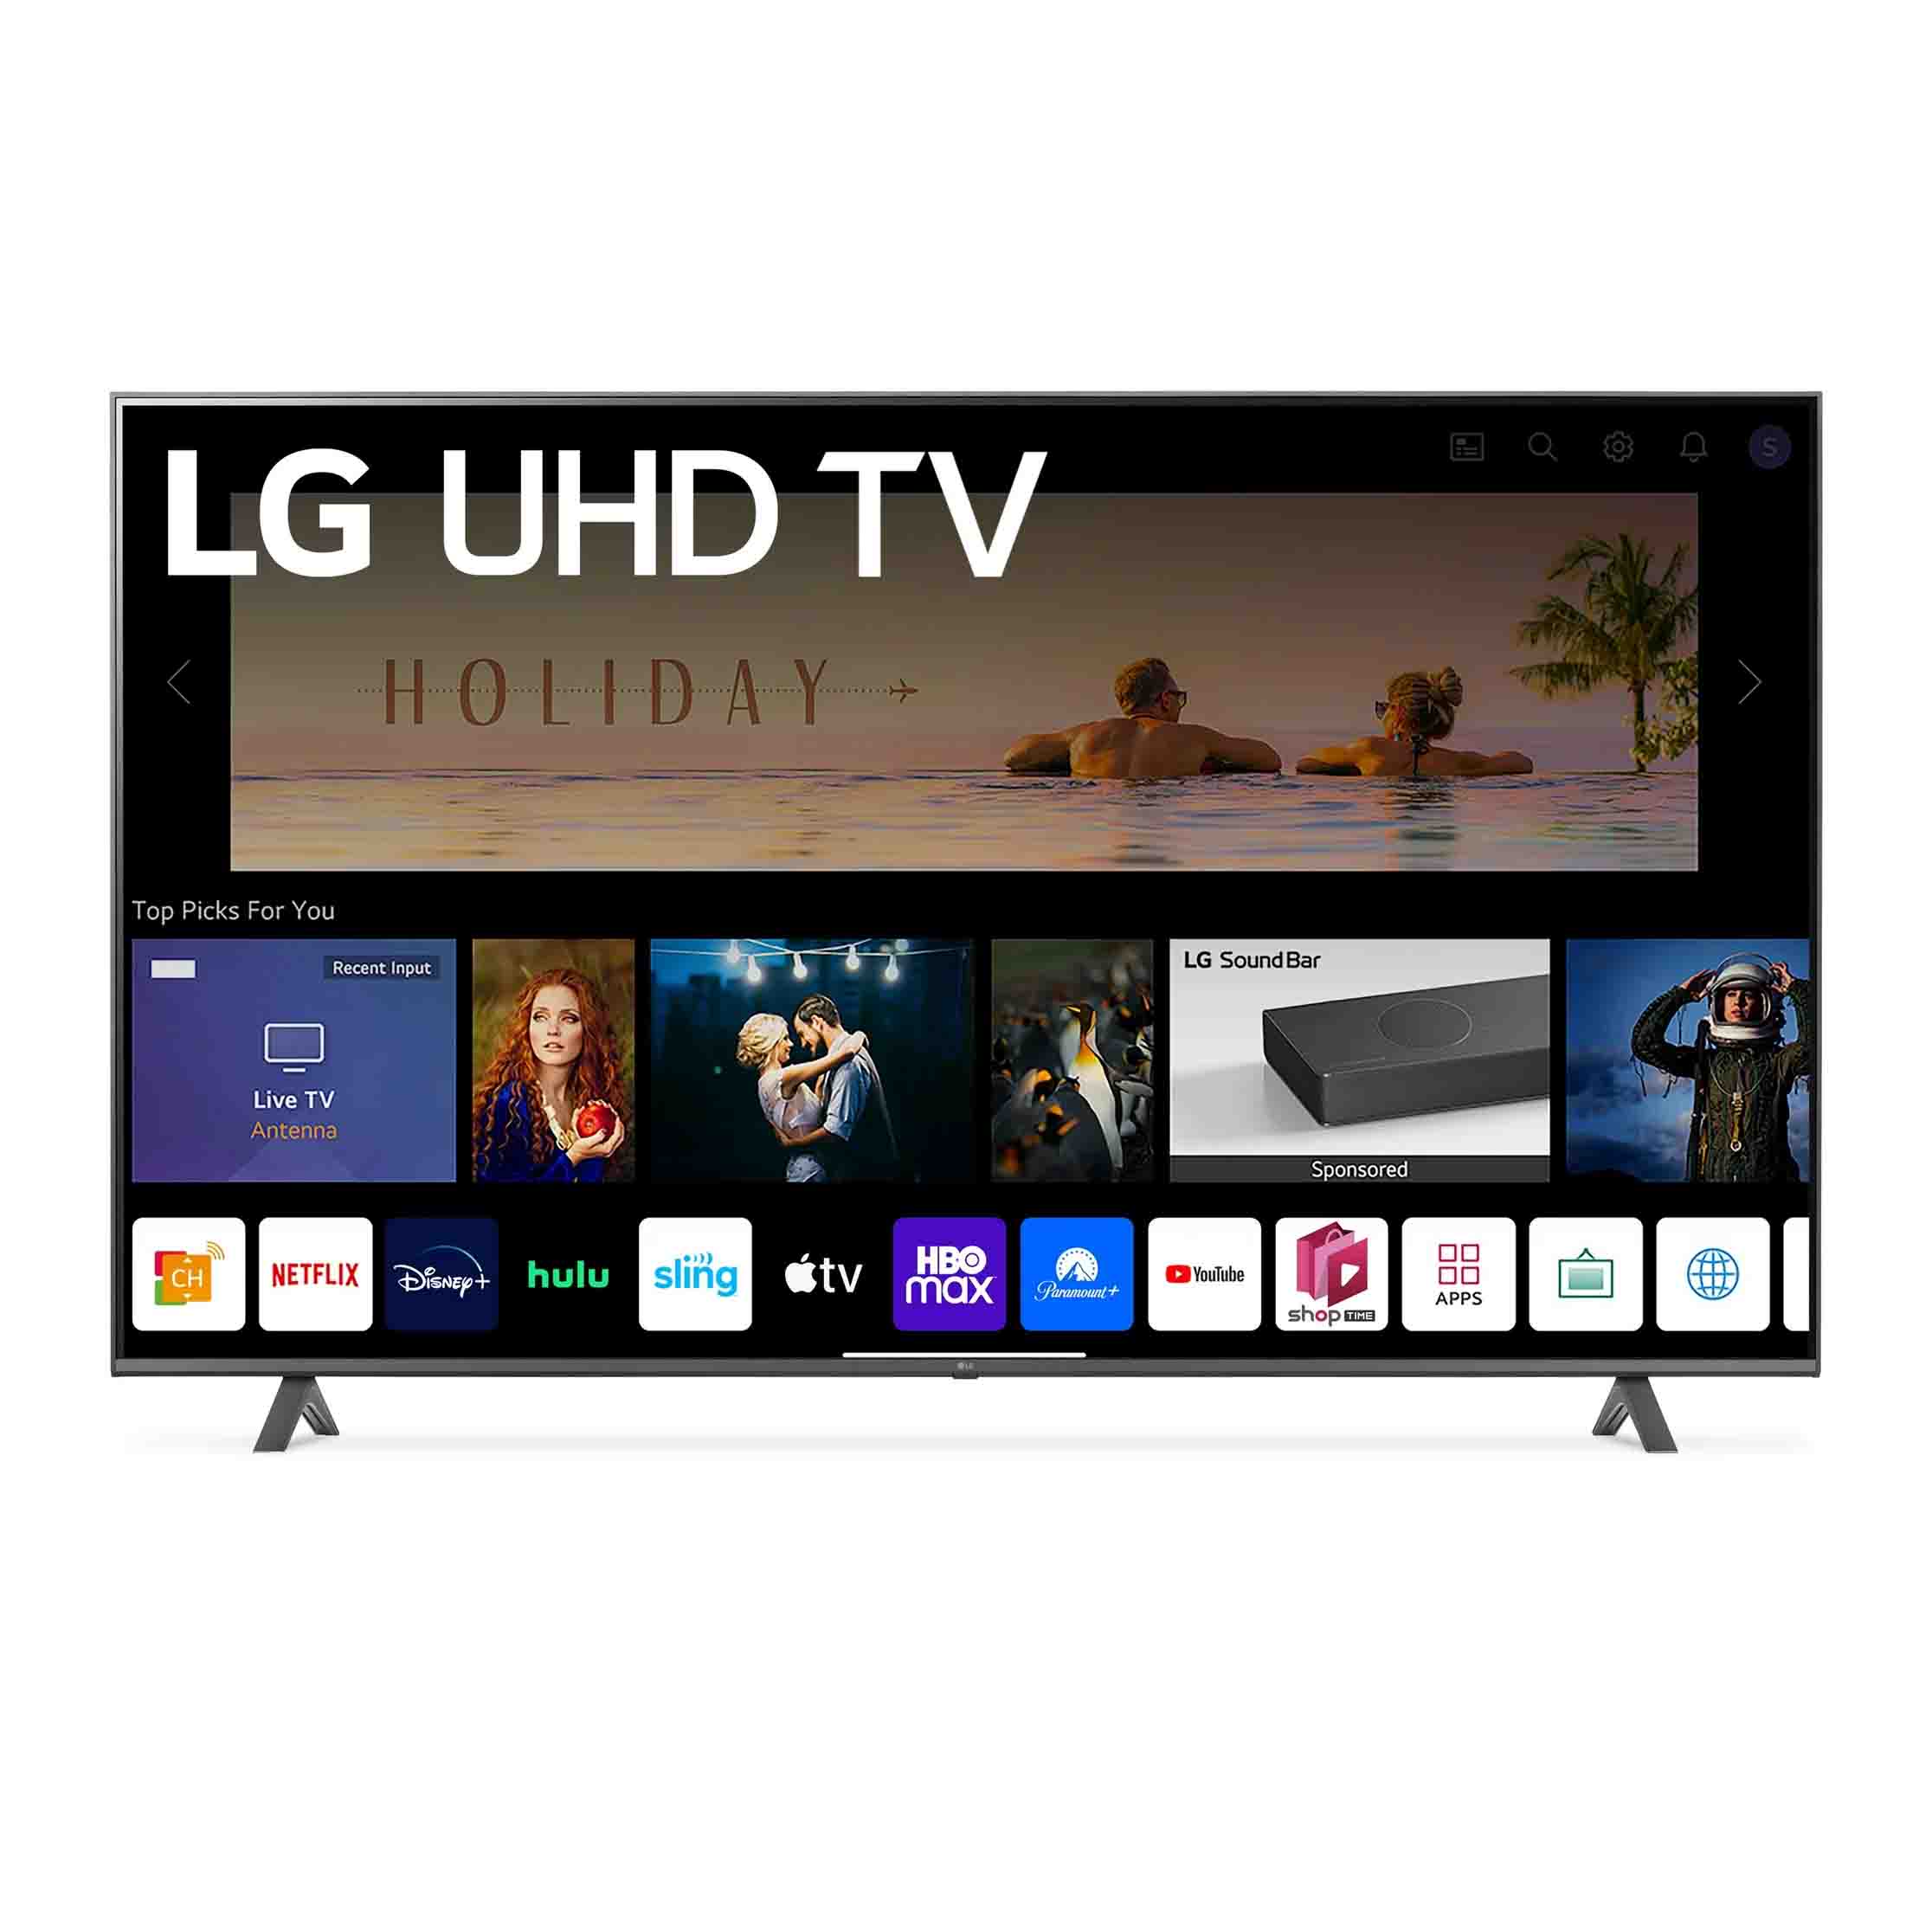 LG 70 inch 4K UHD Smart TV with access to streaming platforms like Netflix, Disney + and hulu 